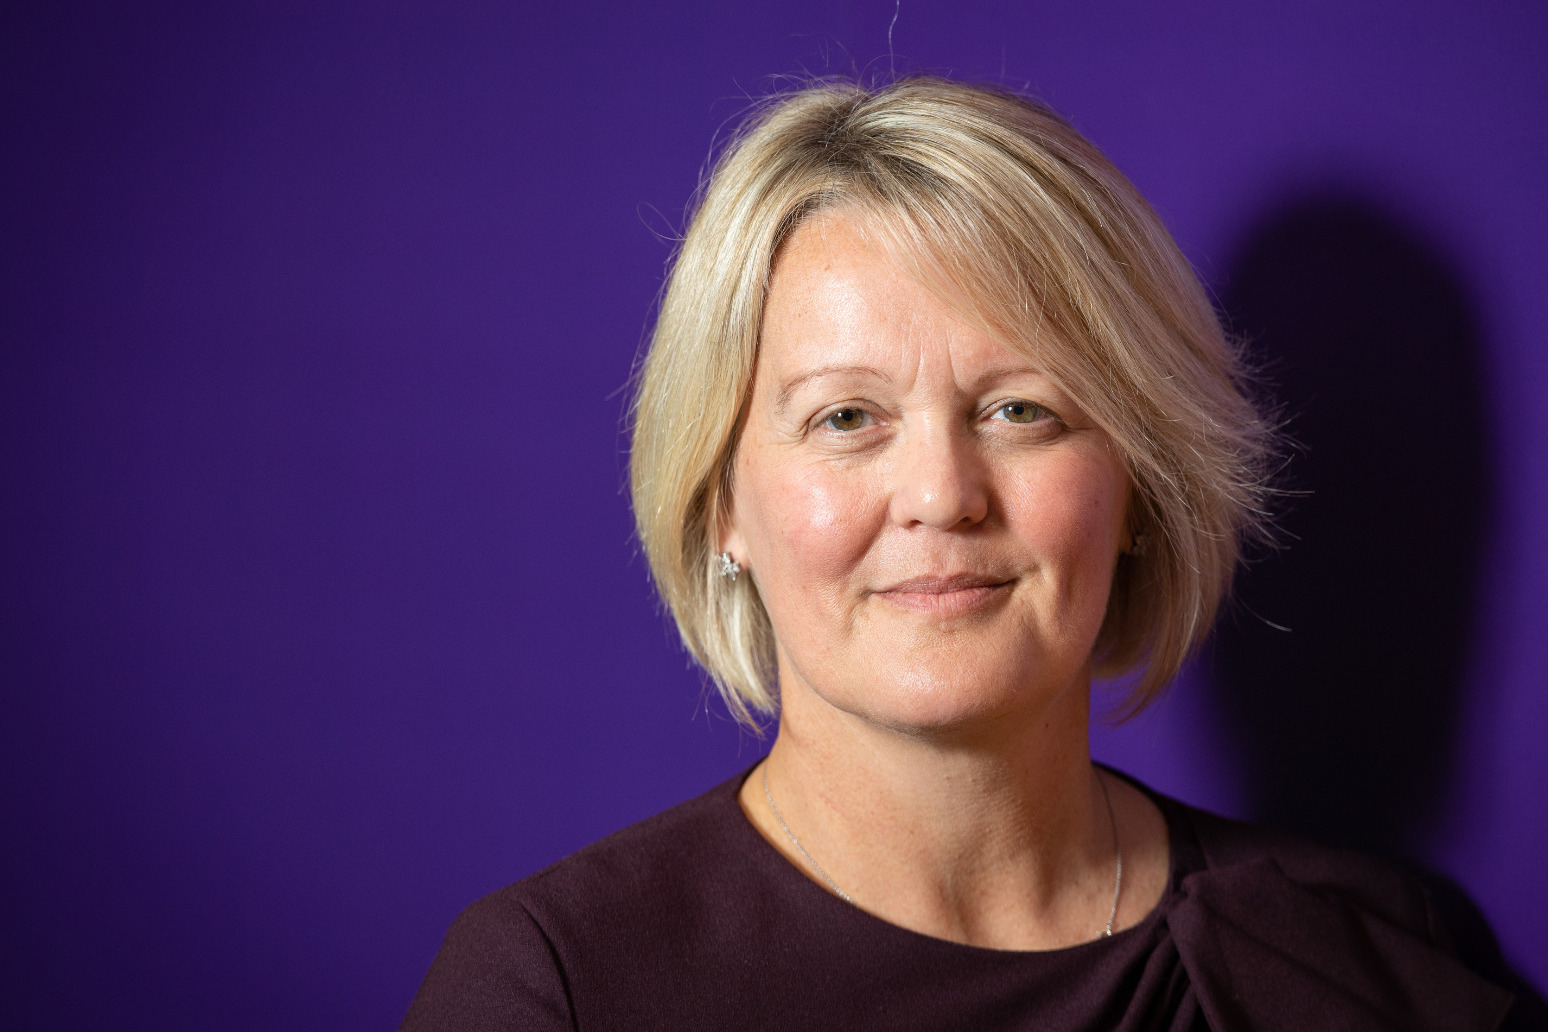 Ex-NatWest boss Alison Rose set for £2.4m payout after resigning over Farage row 